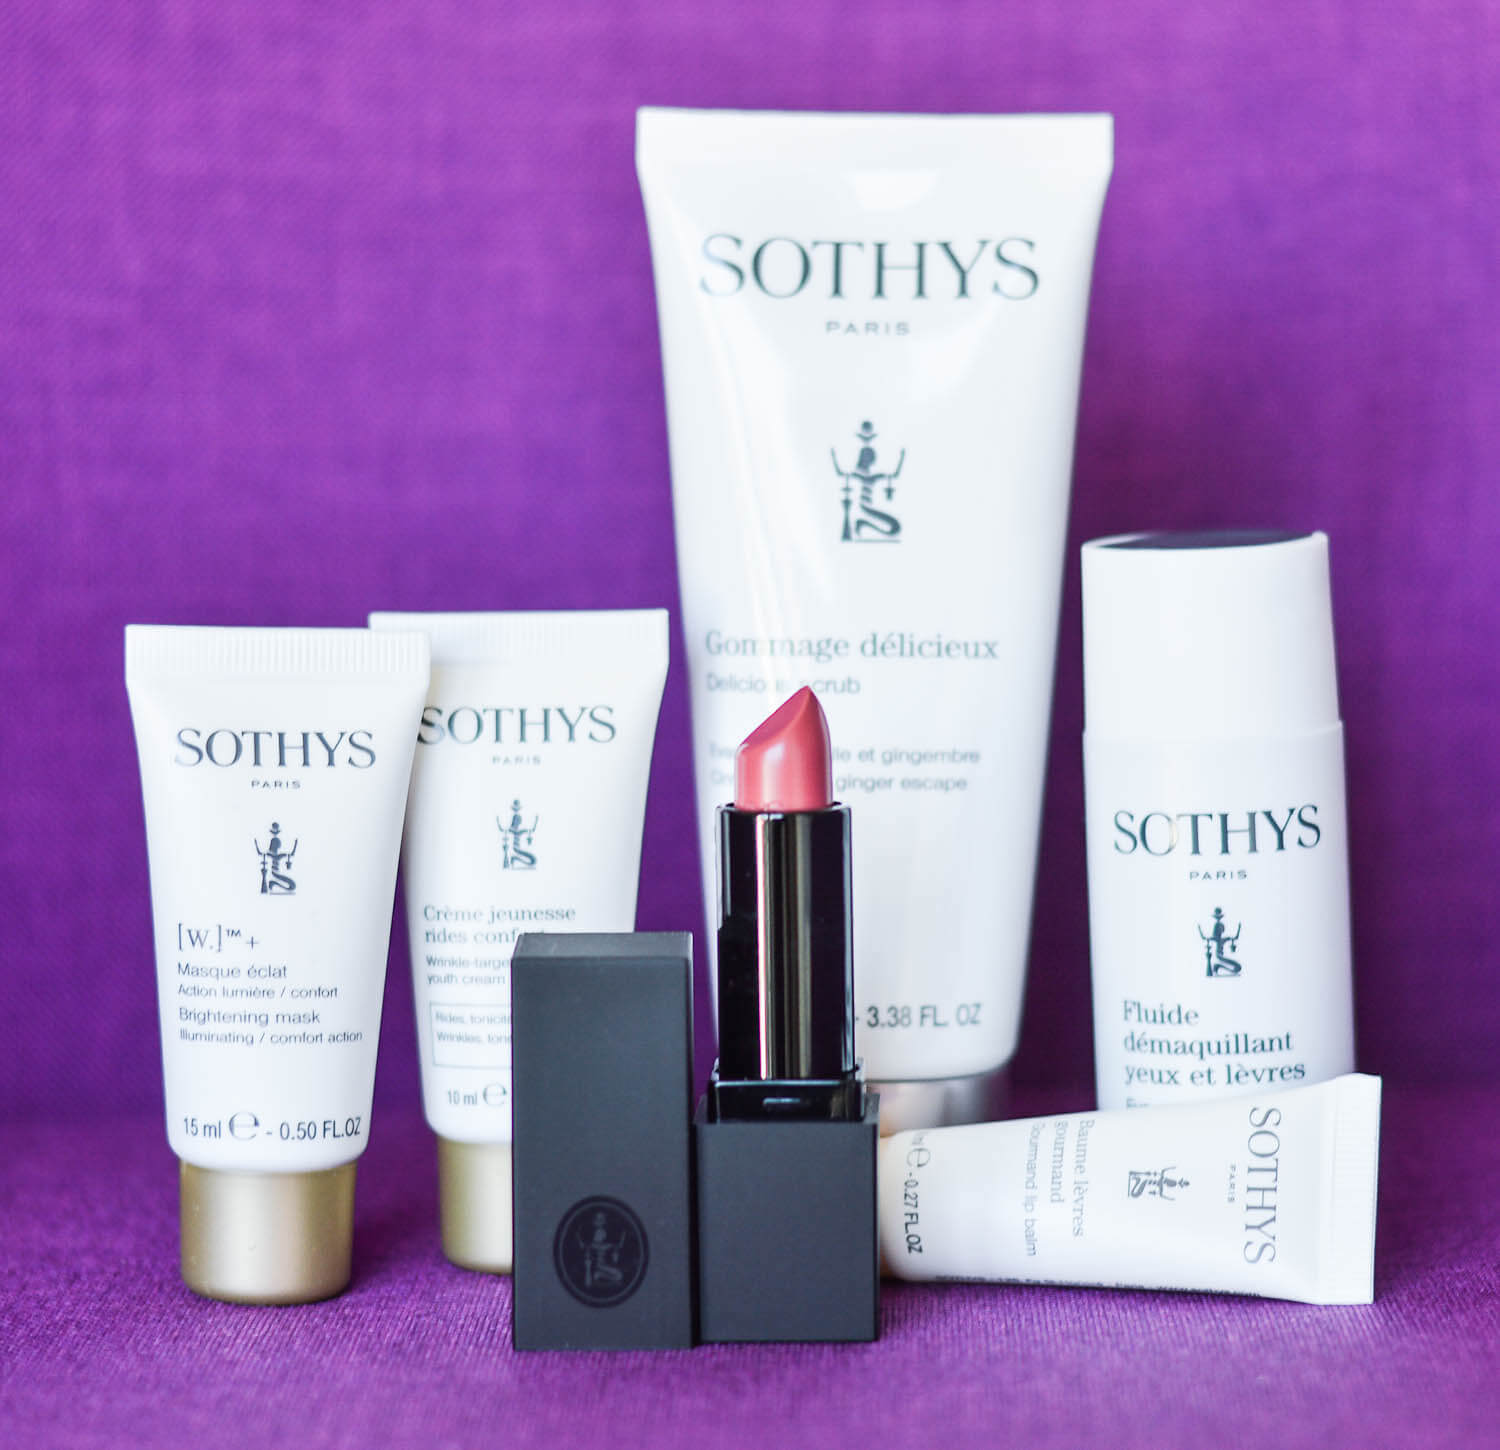 Kationette-Beautyblogger-Sothys-Box-Review-Lifestyle